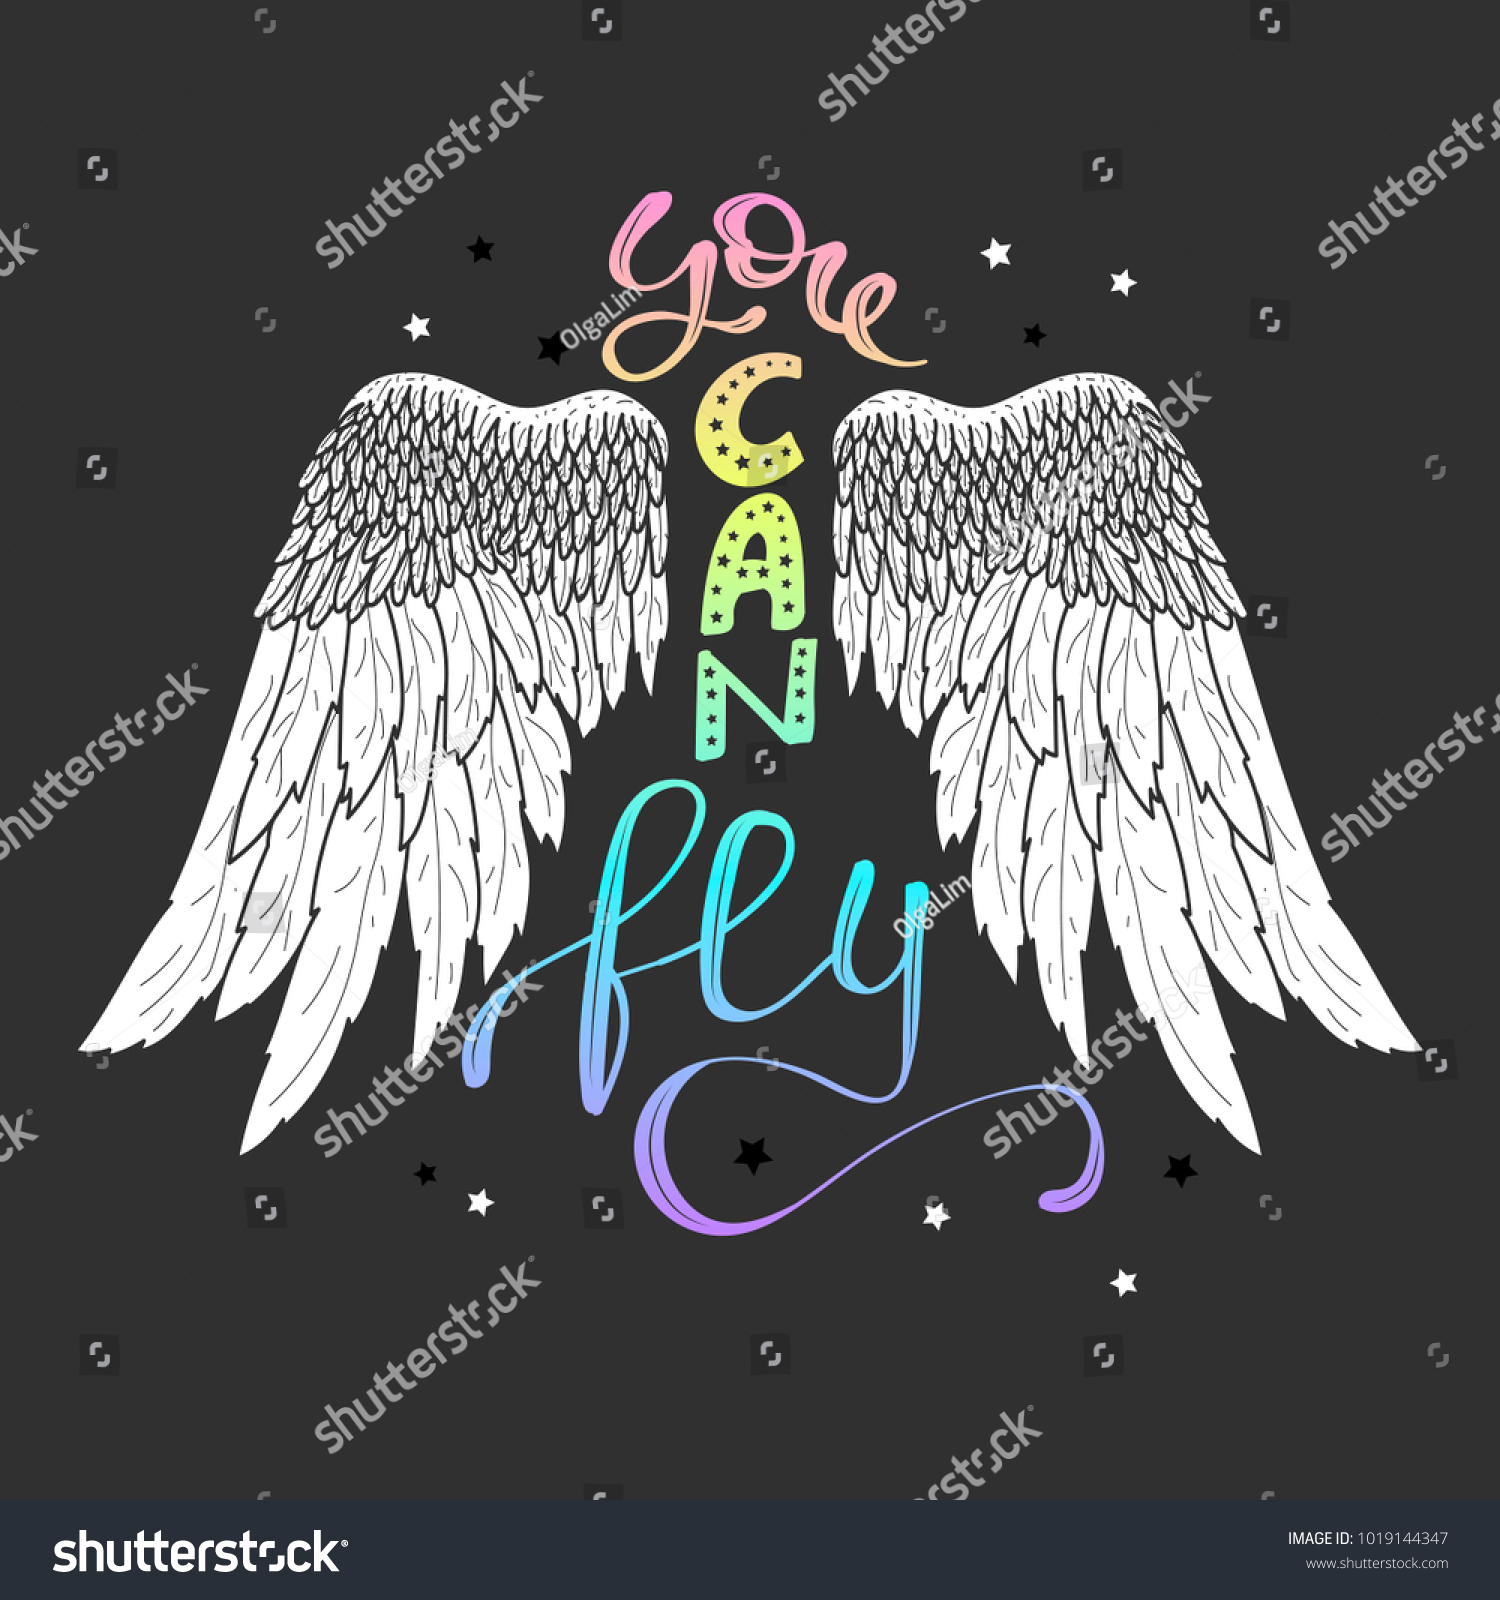 You Can Fly Inspirational Quote About Stock Illustration 1019144347 ...